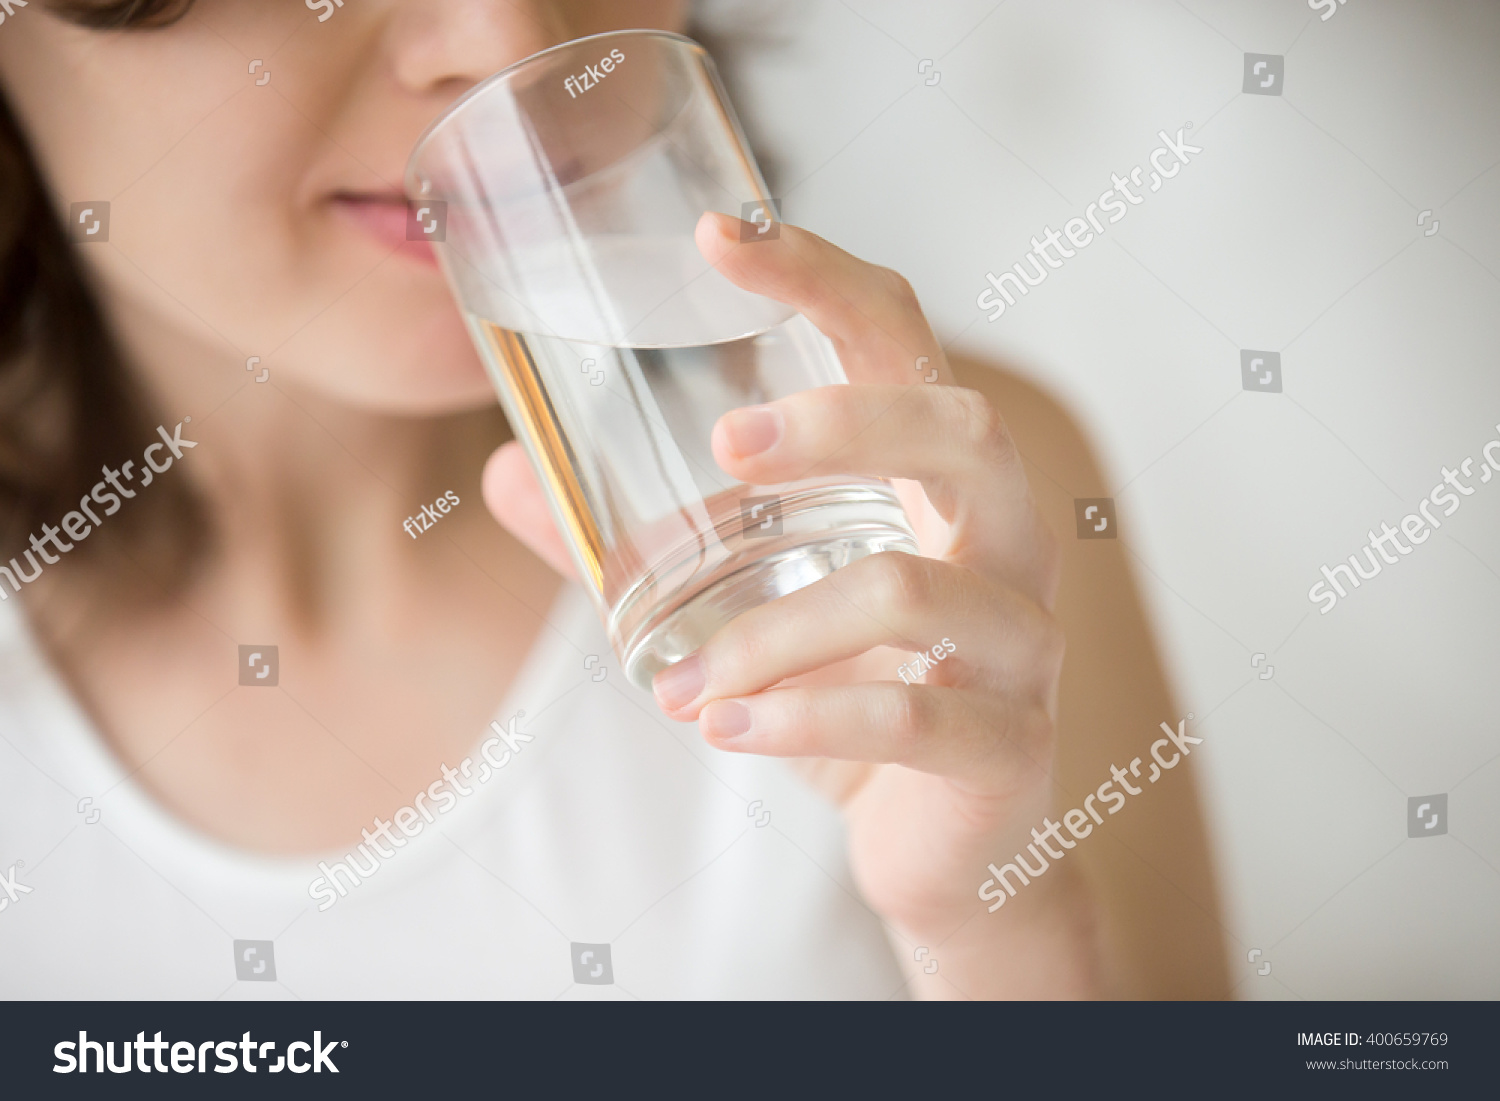 Happy beautiful young woman drinking water. Smiling caucasian female model holding transparent glass in her hand. Closeup. Focus on the arm #400659769